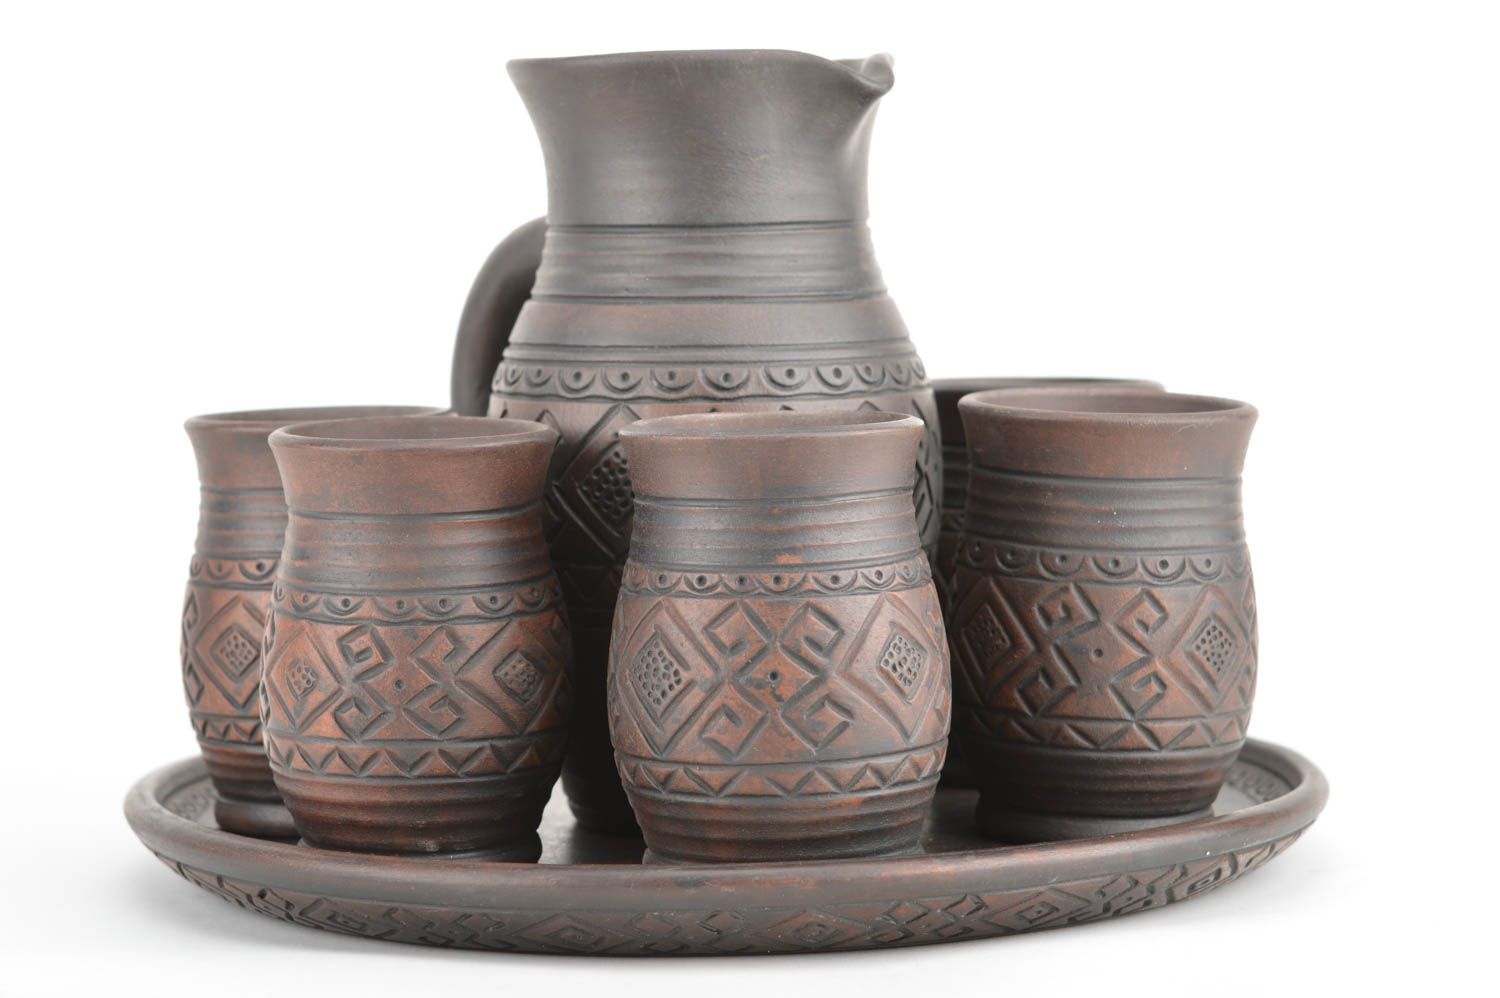 30 oz ceramic wine jug in dark brown color with six wine goblets and ashtray 8,7 lb photo 5